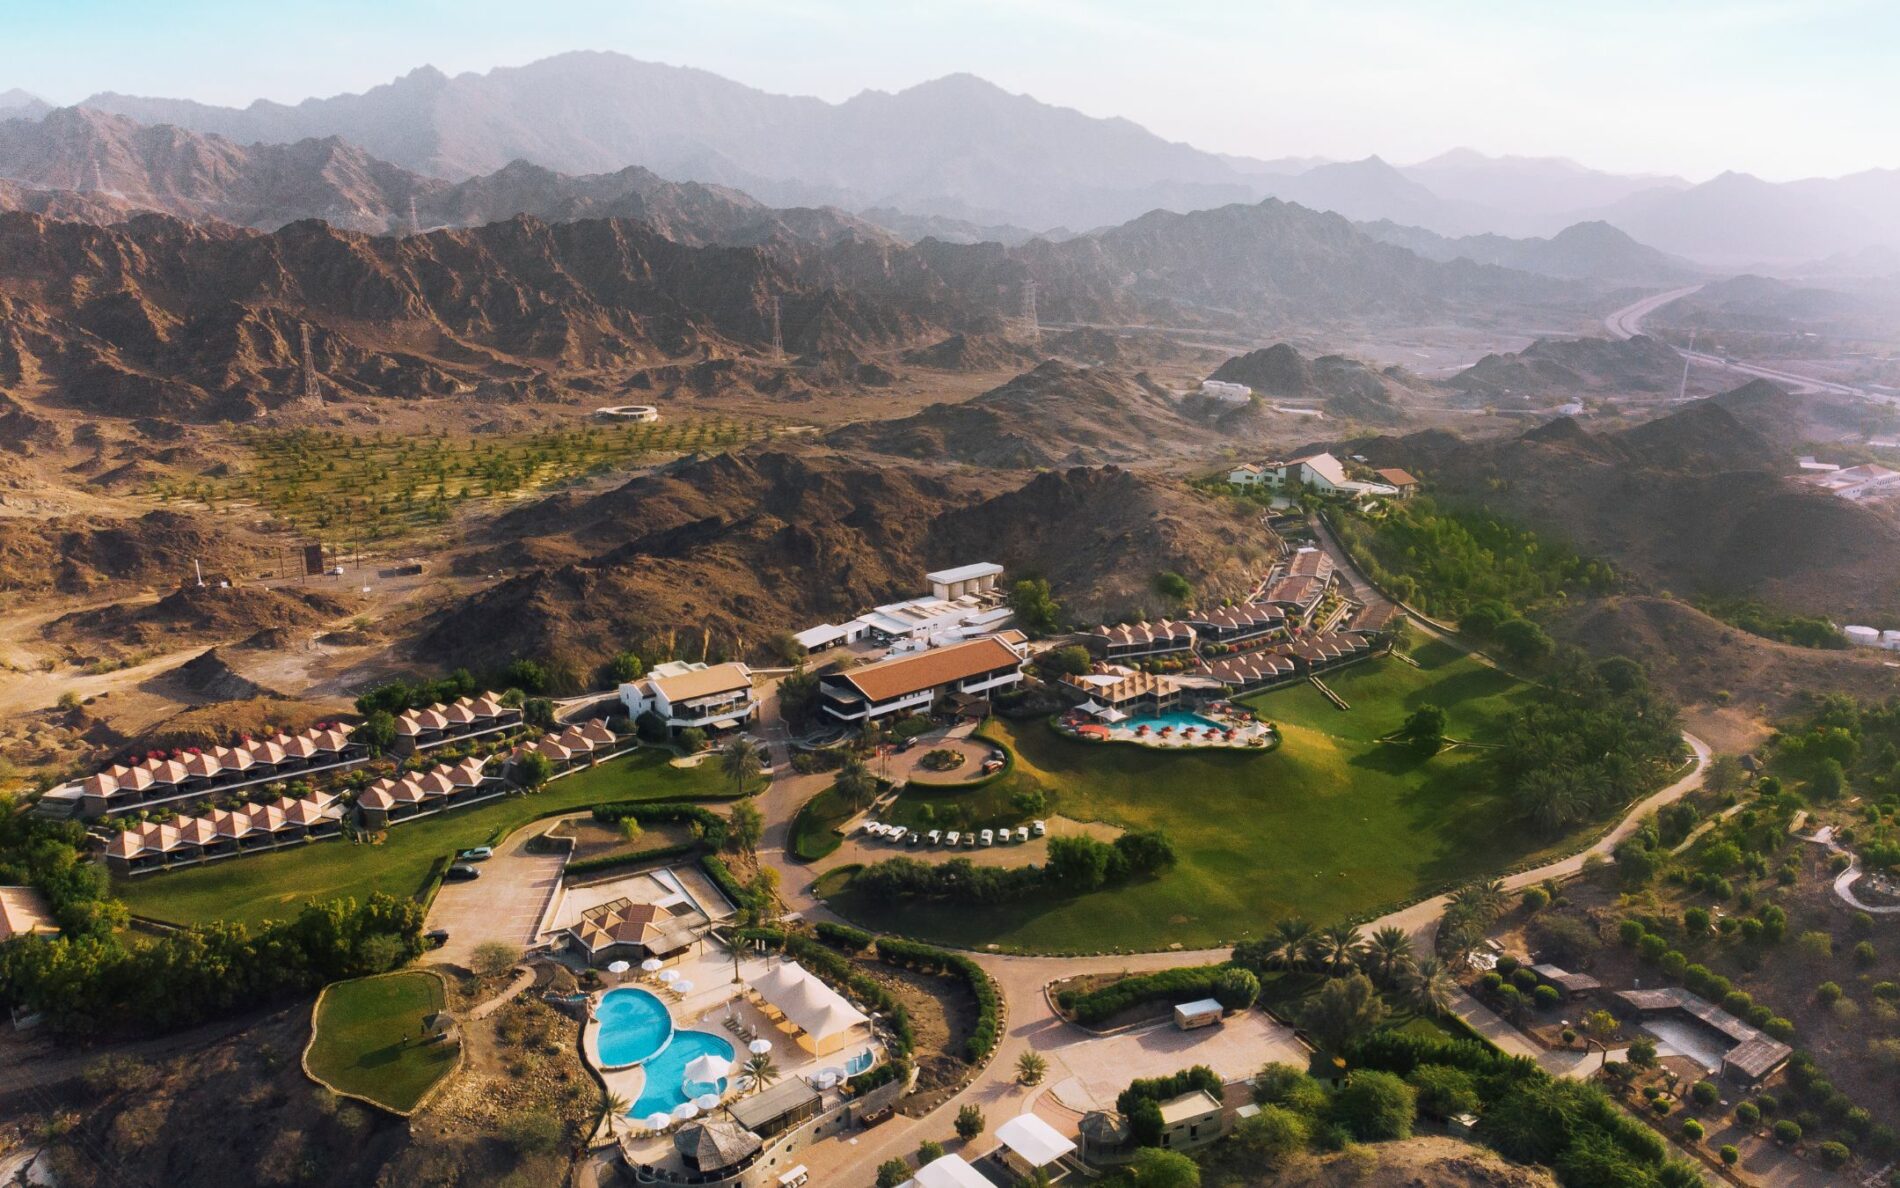 mountains in the UAE with luxury hotel resort with luxury pool. lots of green tress and grass